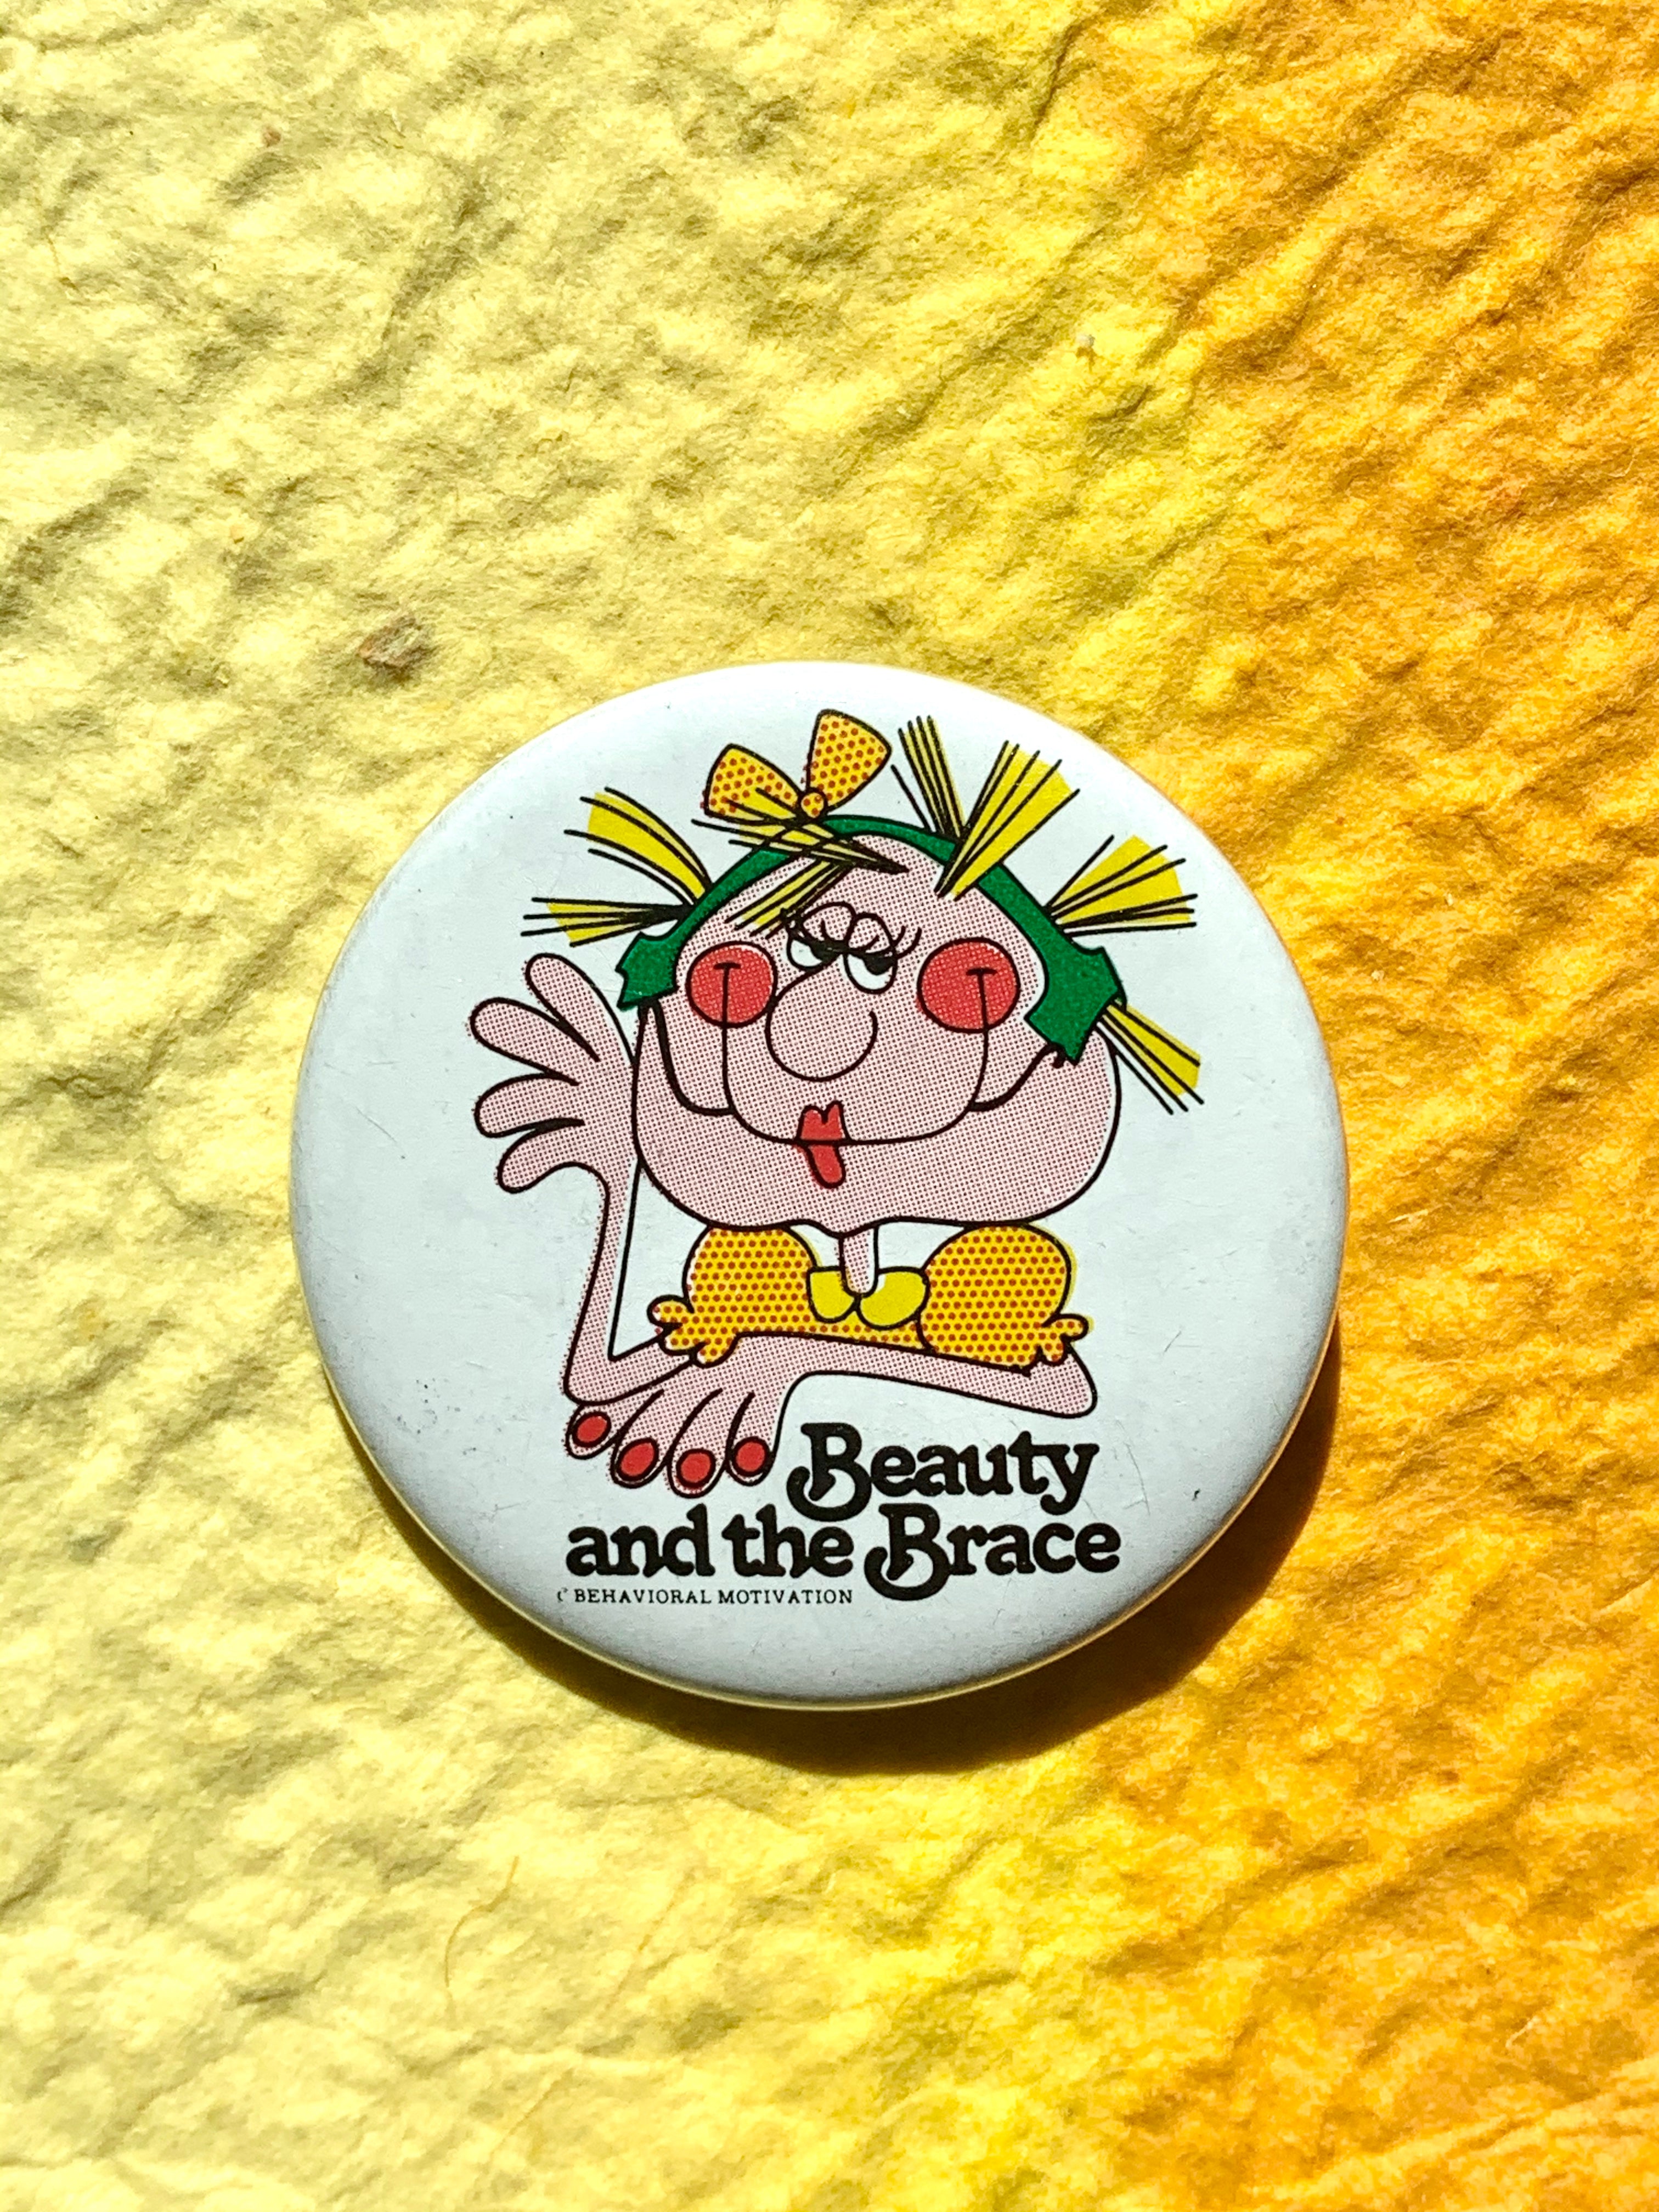 "Beauty and the Brace" Quirky Vintage Pinback Button